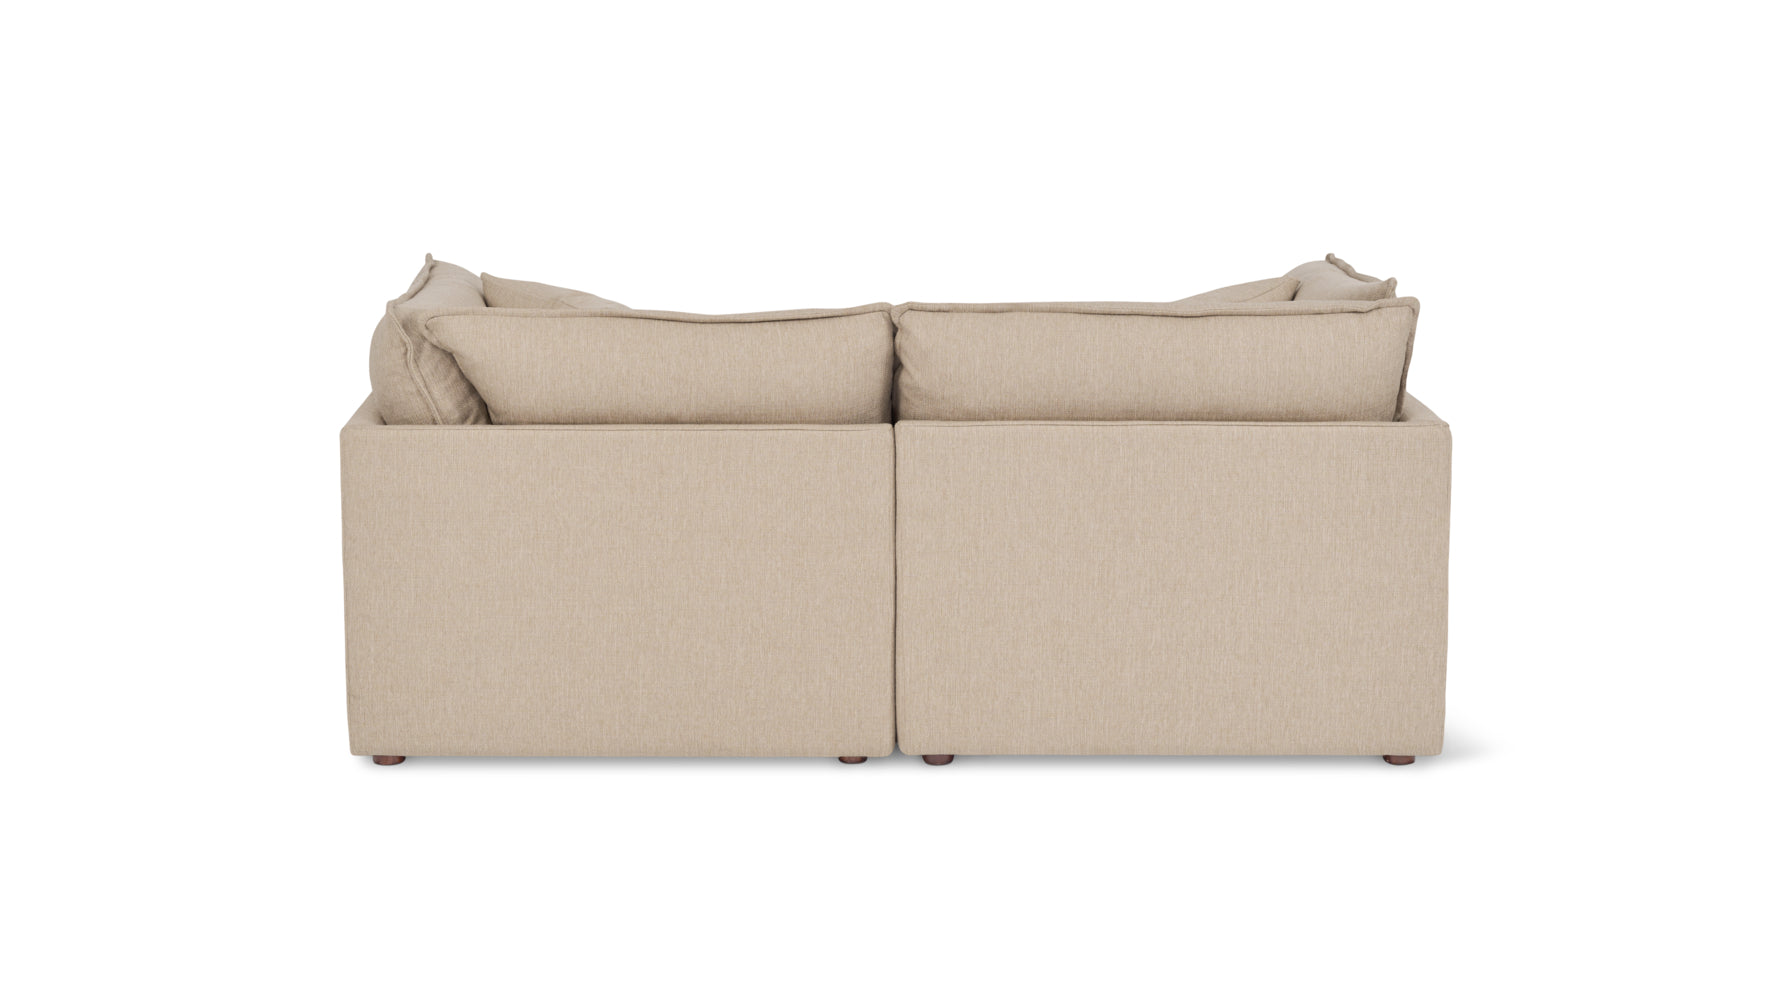 Chill Time 2-Piece Modular Sofa, Biscuit - Image 4